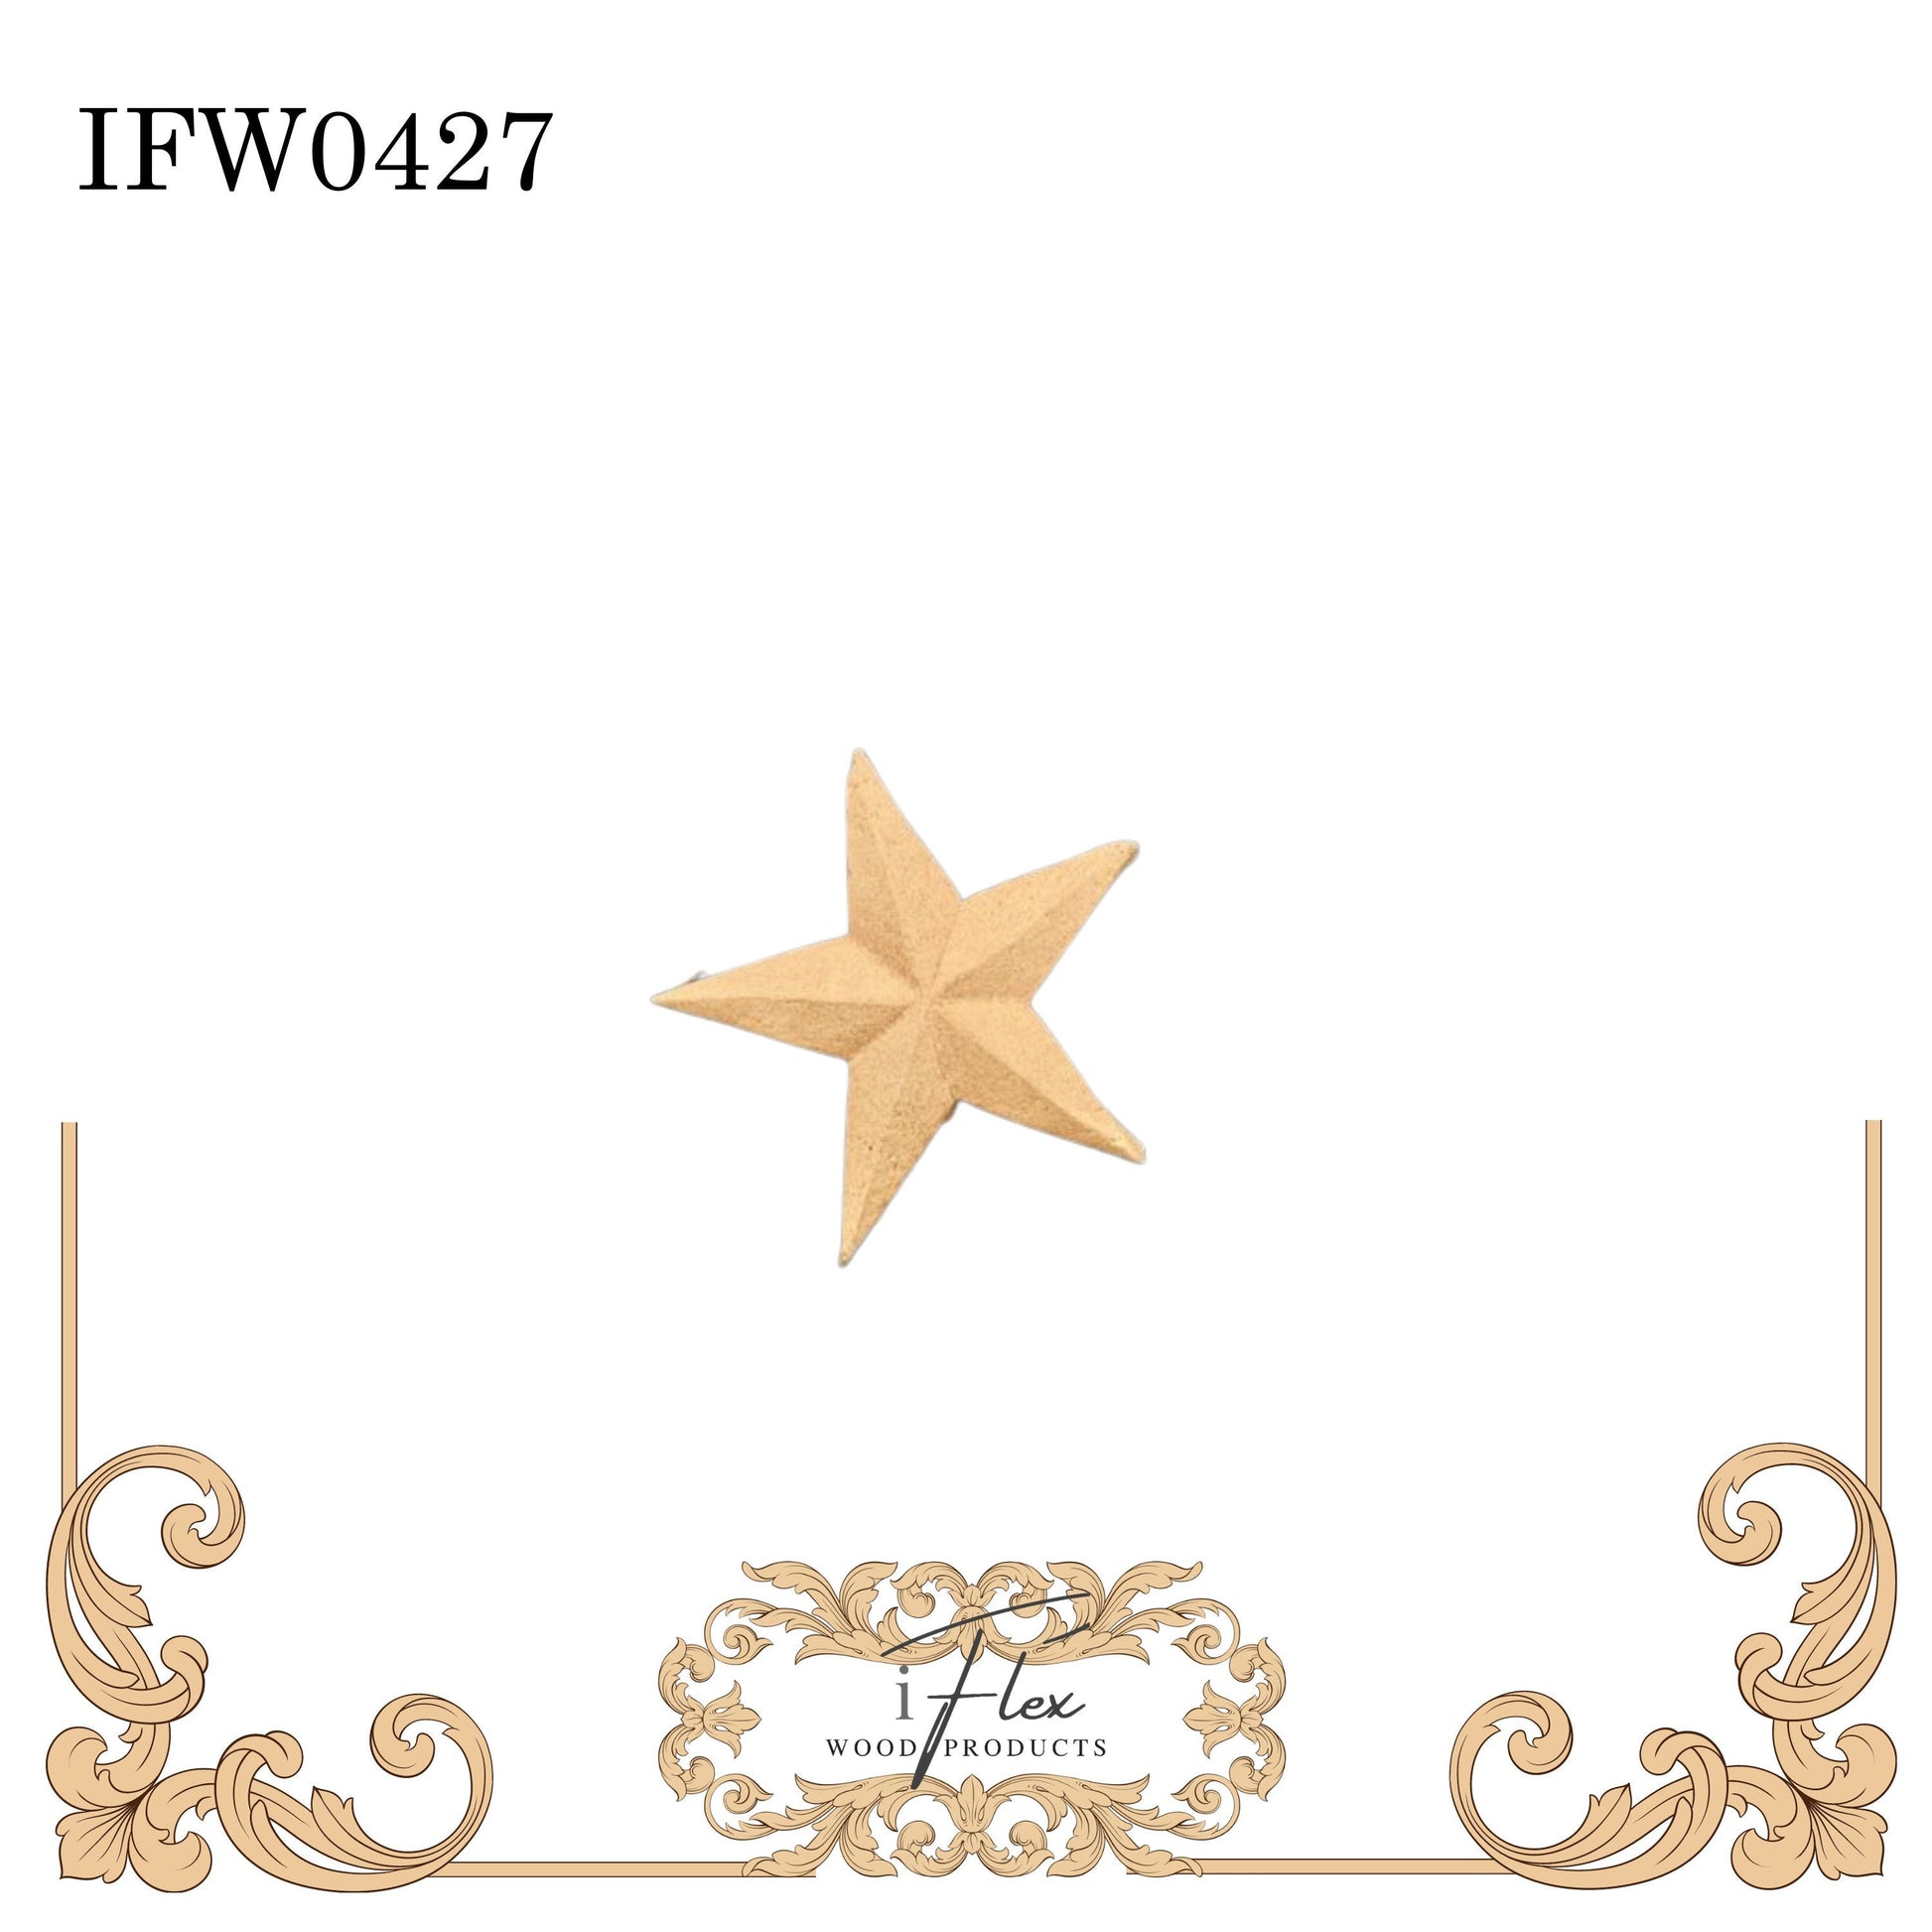 IFW 0427  iFlex Wood Products star, misc bendable mouldings, flexible, wooden appliques